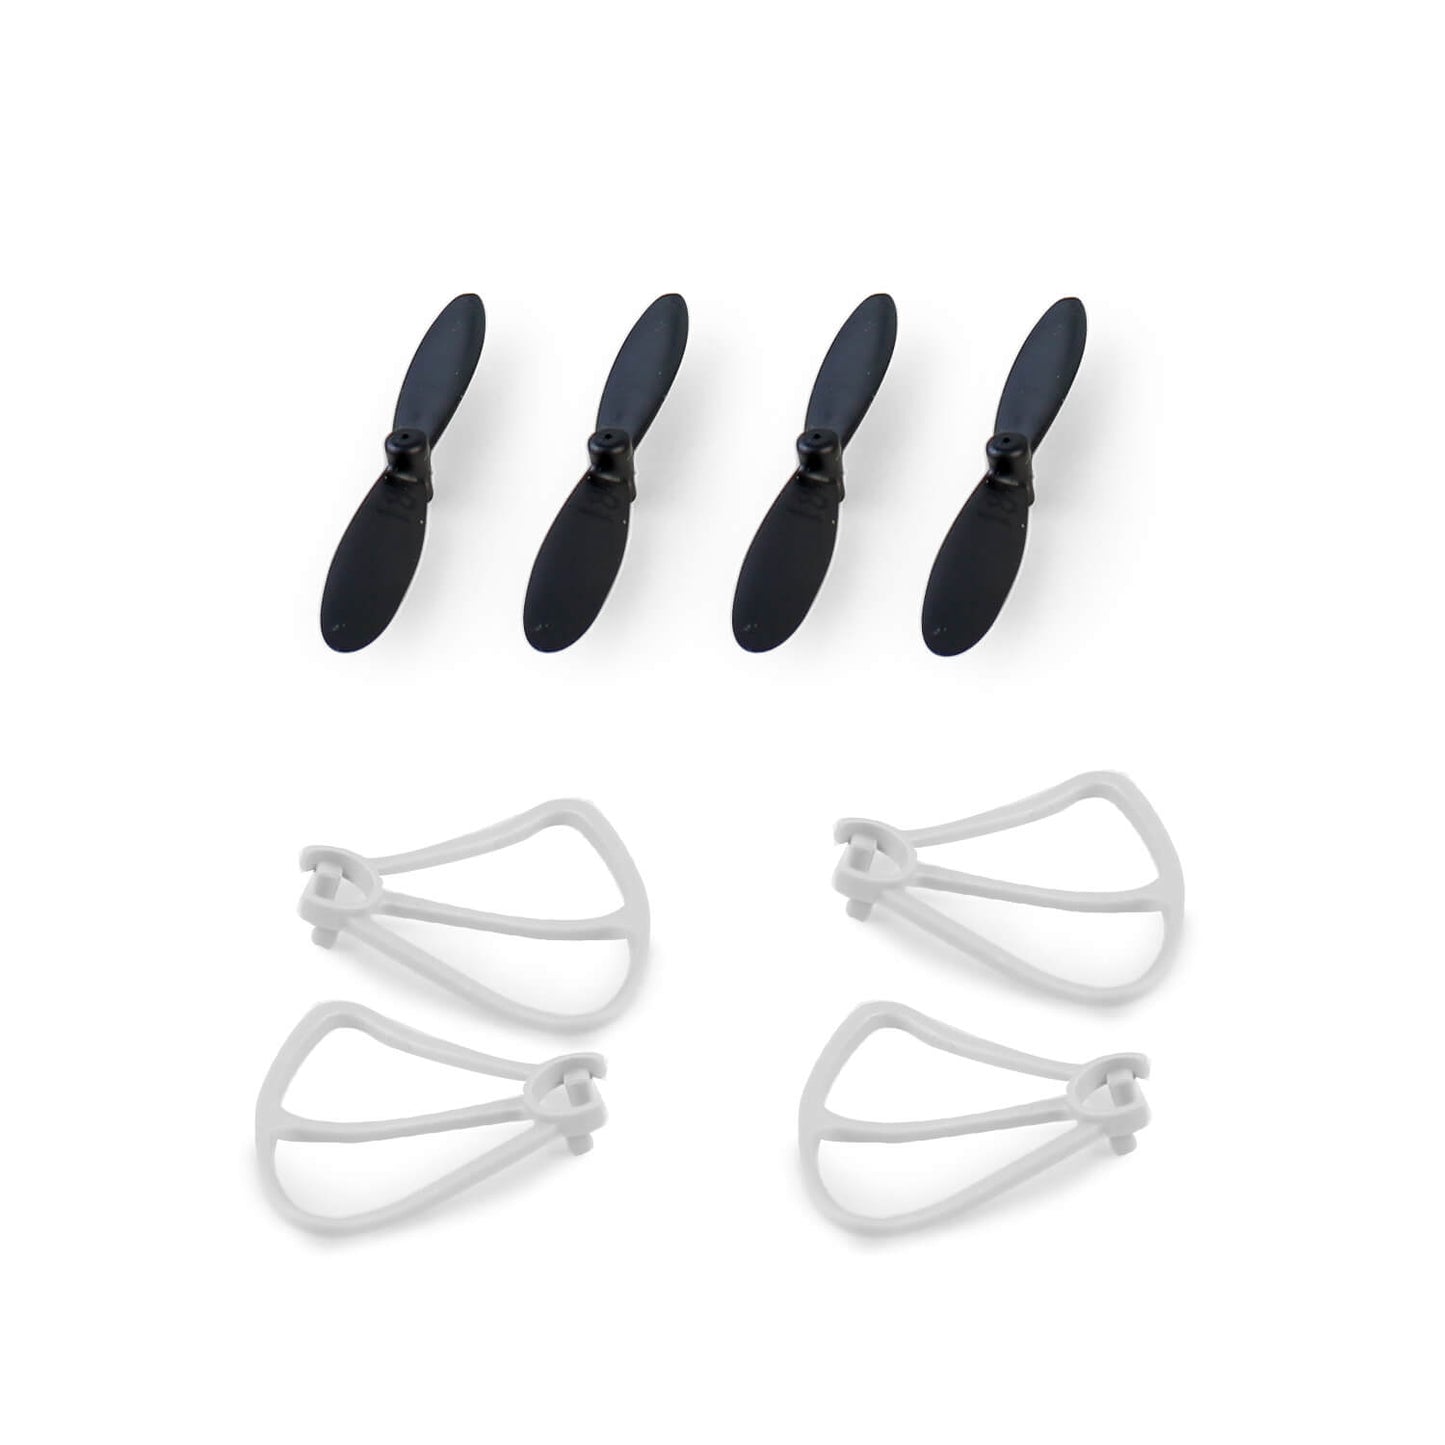 4D-V9 drone accessories (spare battery + charging cable / spare propeller + protective cover)